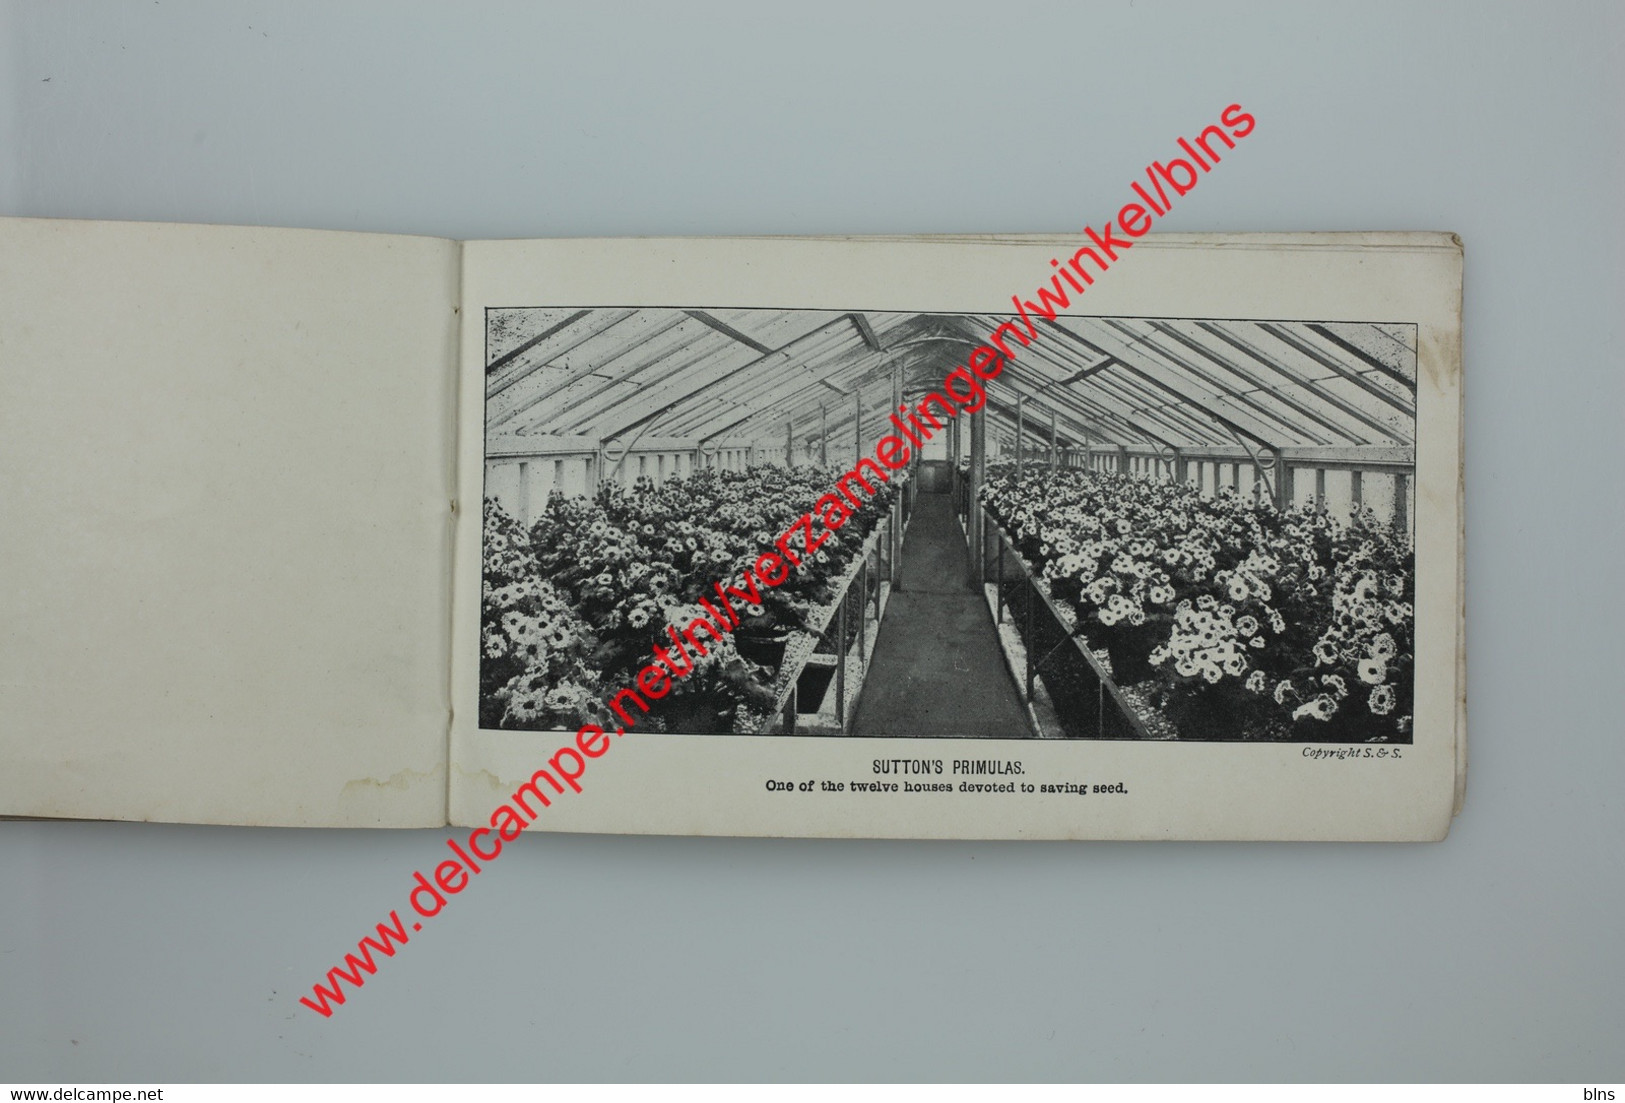 The Royal Seed Establishment Reading - Sutton & Sons - booklet